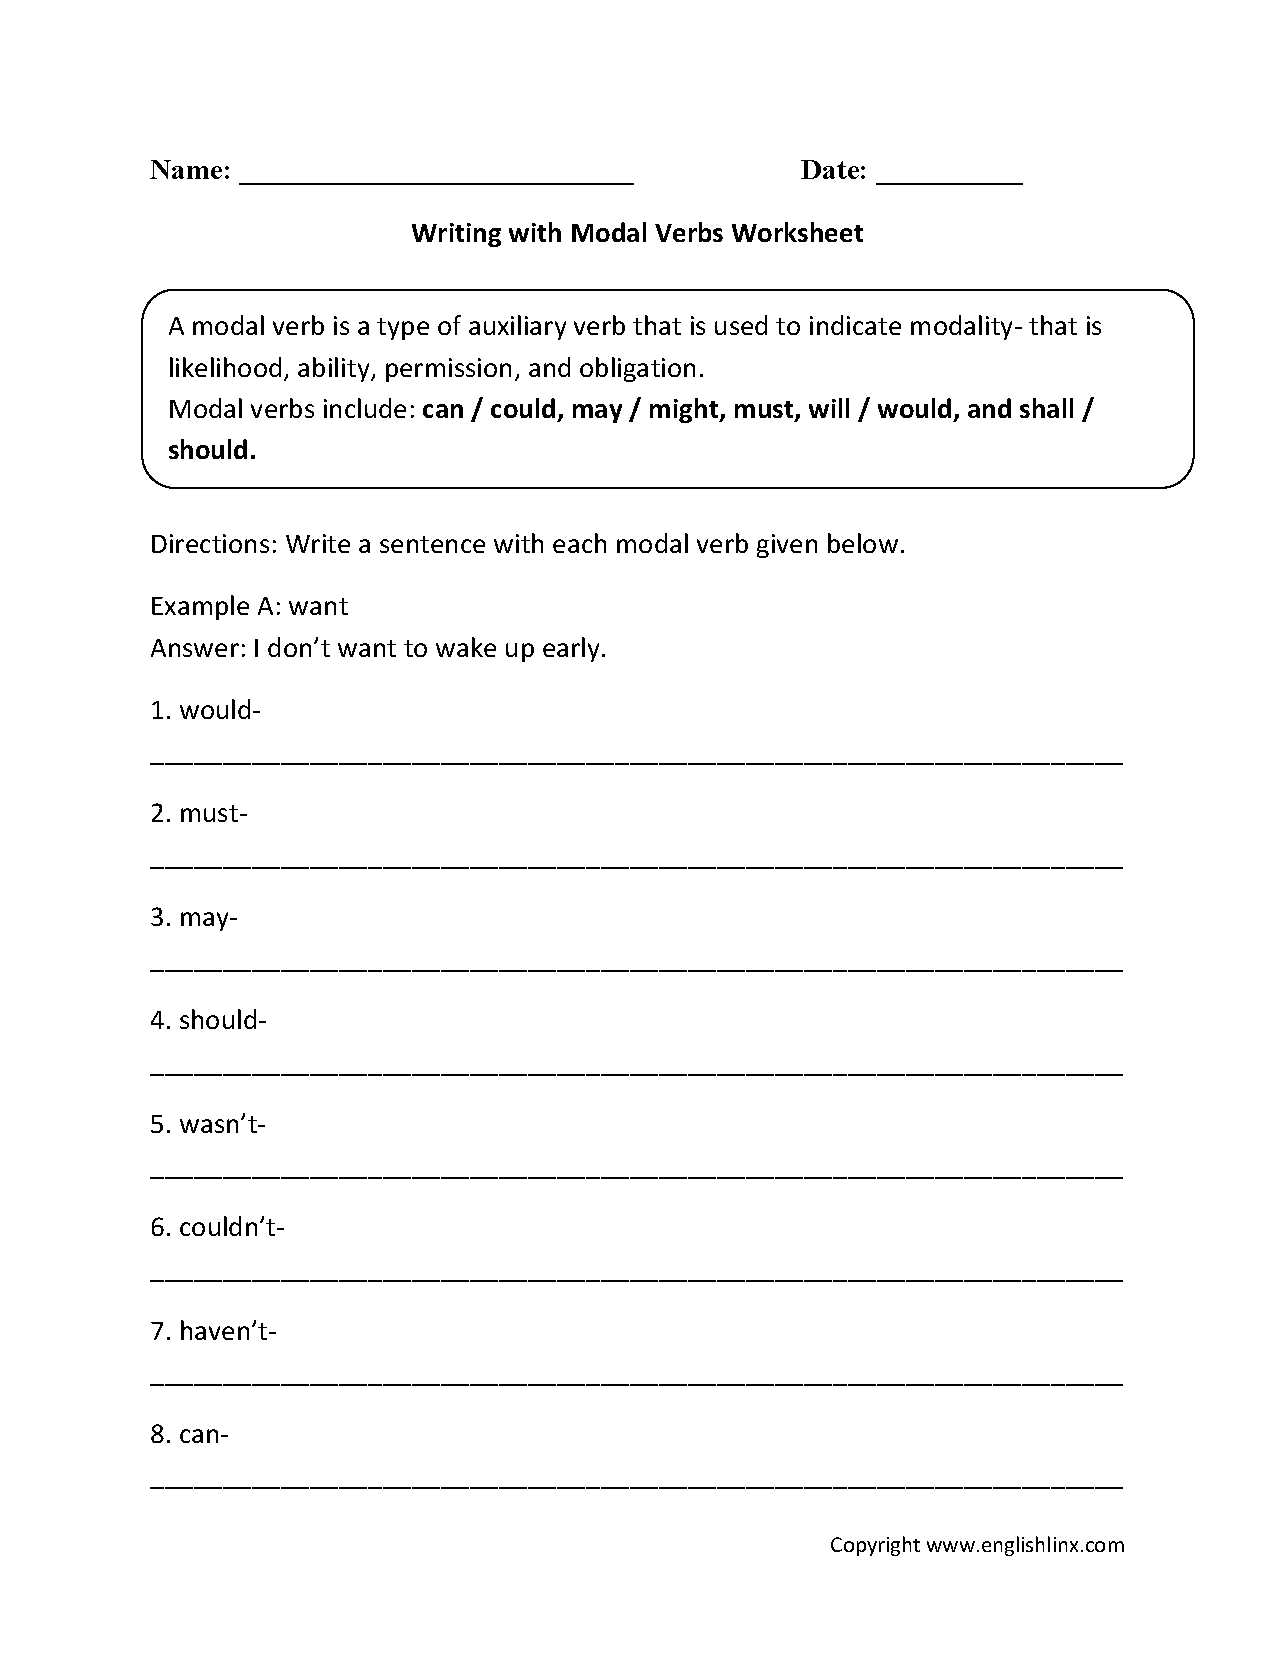 13-best-images-of-auxiliary-verbs-worksheets-23-helping-verbs-list-modal-auxiliary-verbs